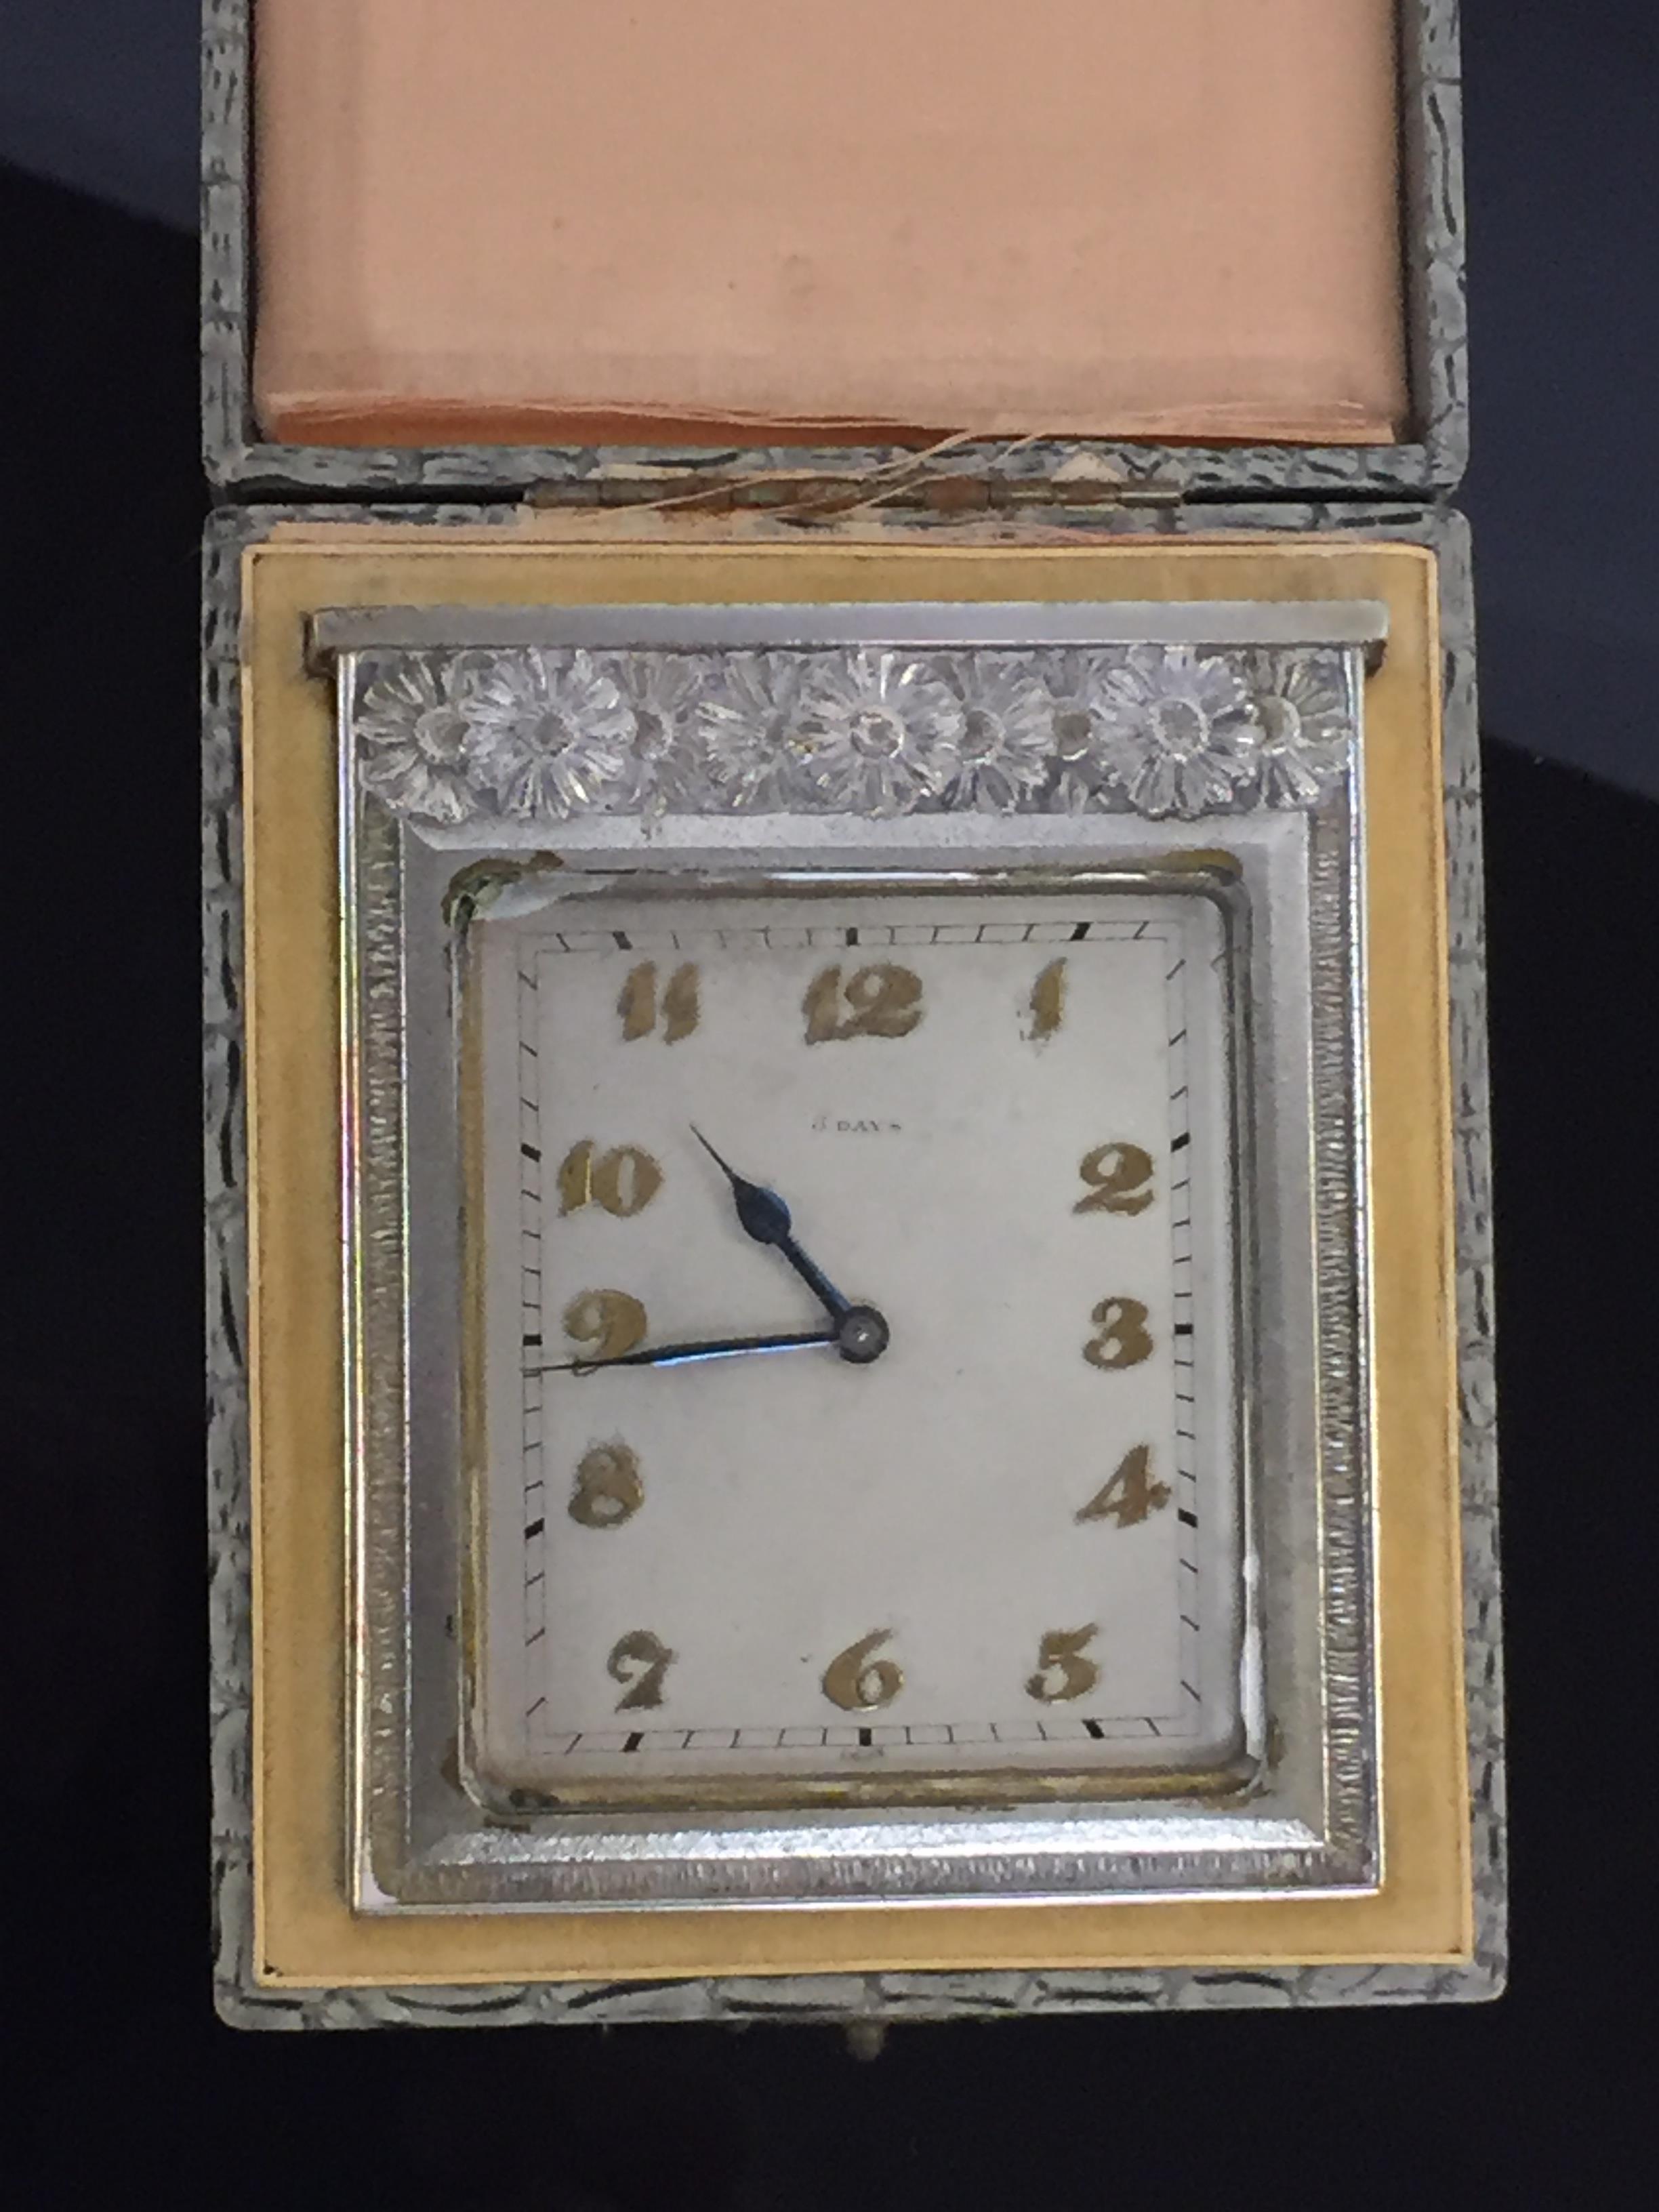 A SWISS WHITE METAL SQUARE DESK CLOCK IN ART DECO STYLE, FLORAL DECORATION TO TOP BORDER. - Image 4 of 4